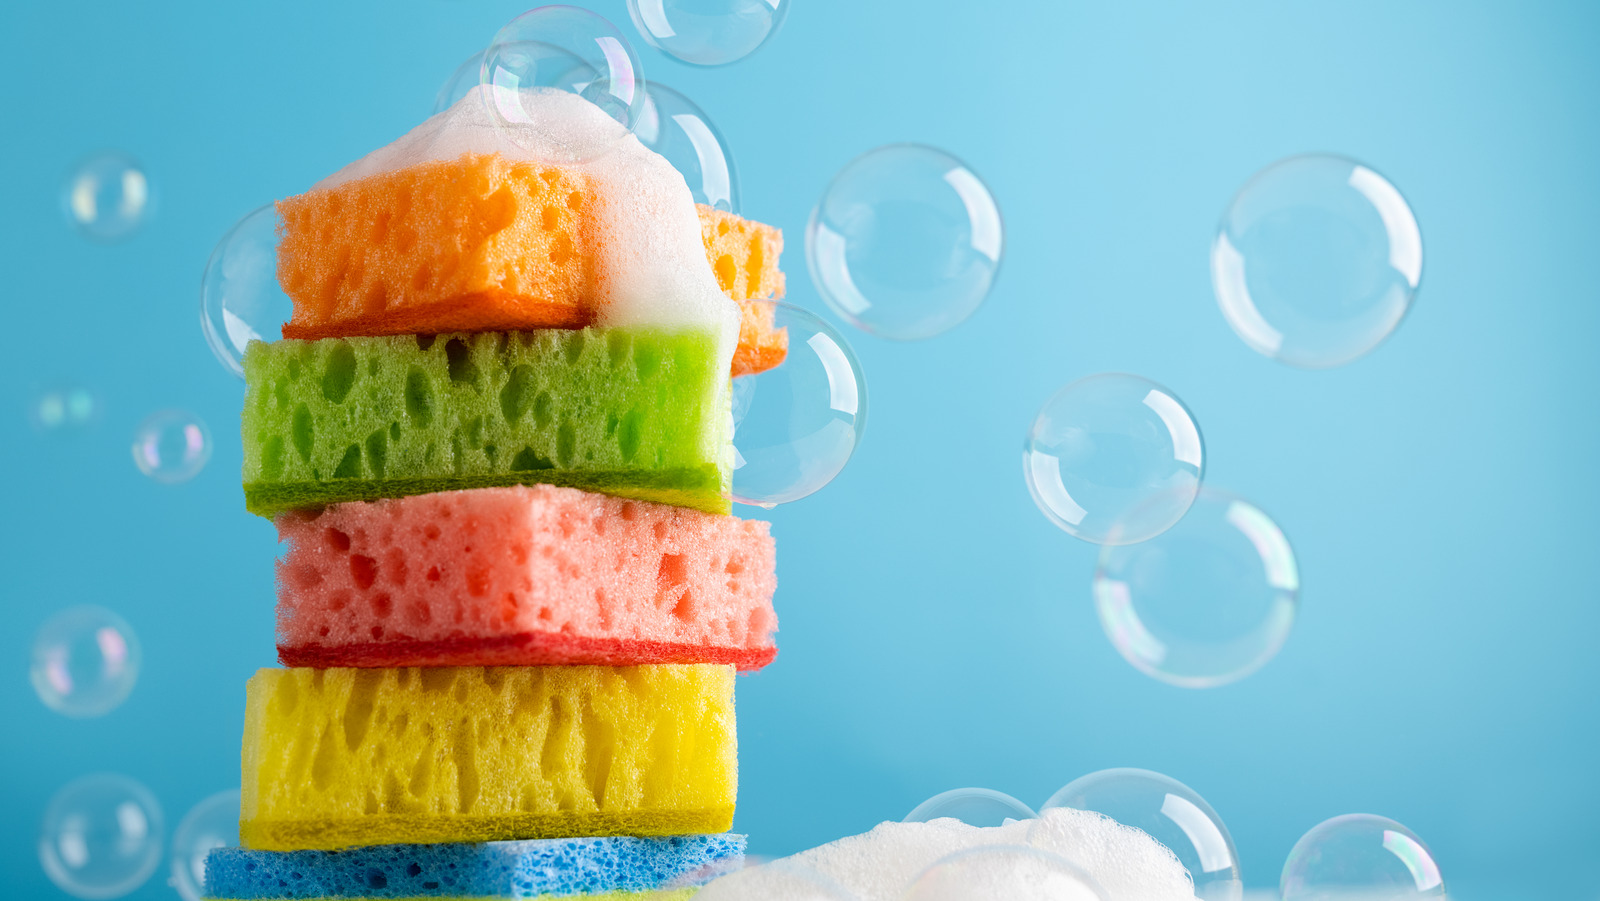 https://www.housedigest.com/img/gallery/how-to-keep-your-sponges-clean/l-intro-1667847283.jpg